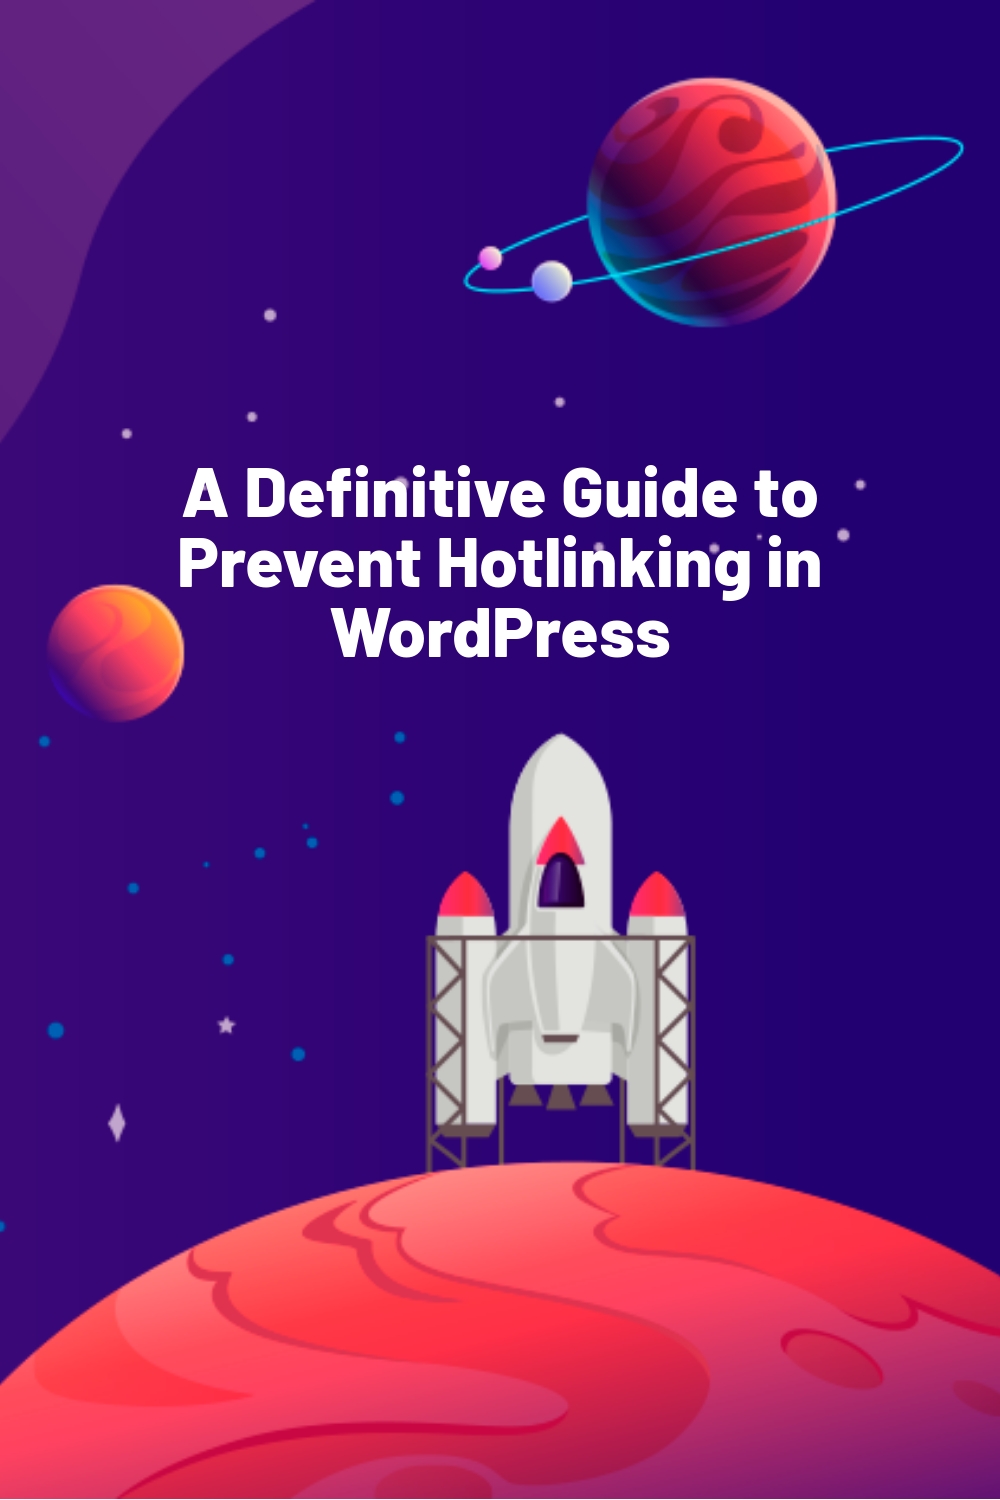 A Definitive Guide to Prevent Hotlinking in WordPress